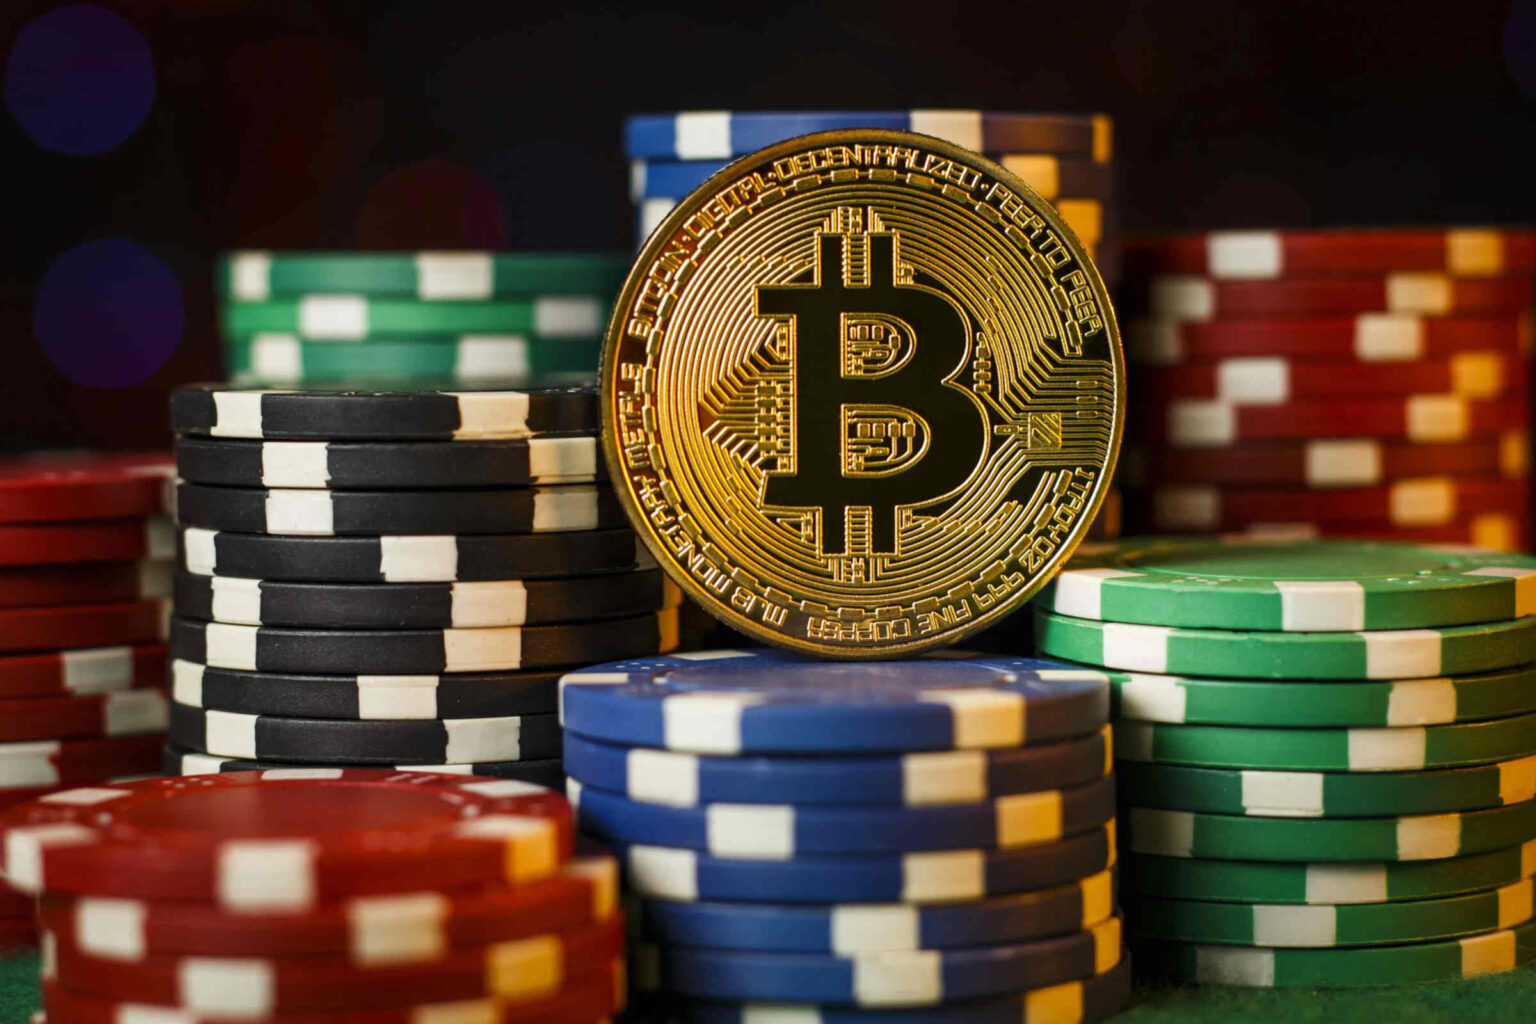 Want to win big prizes from the comfort of your home? Mine for the jackpot you deserve when you use bitcoin to play at a crypto casino online!